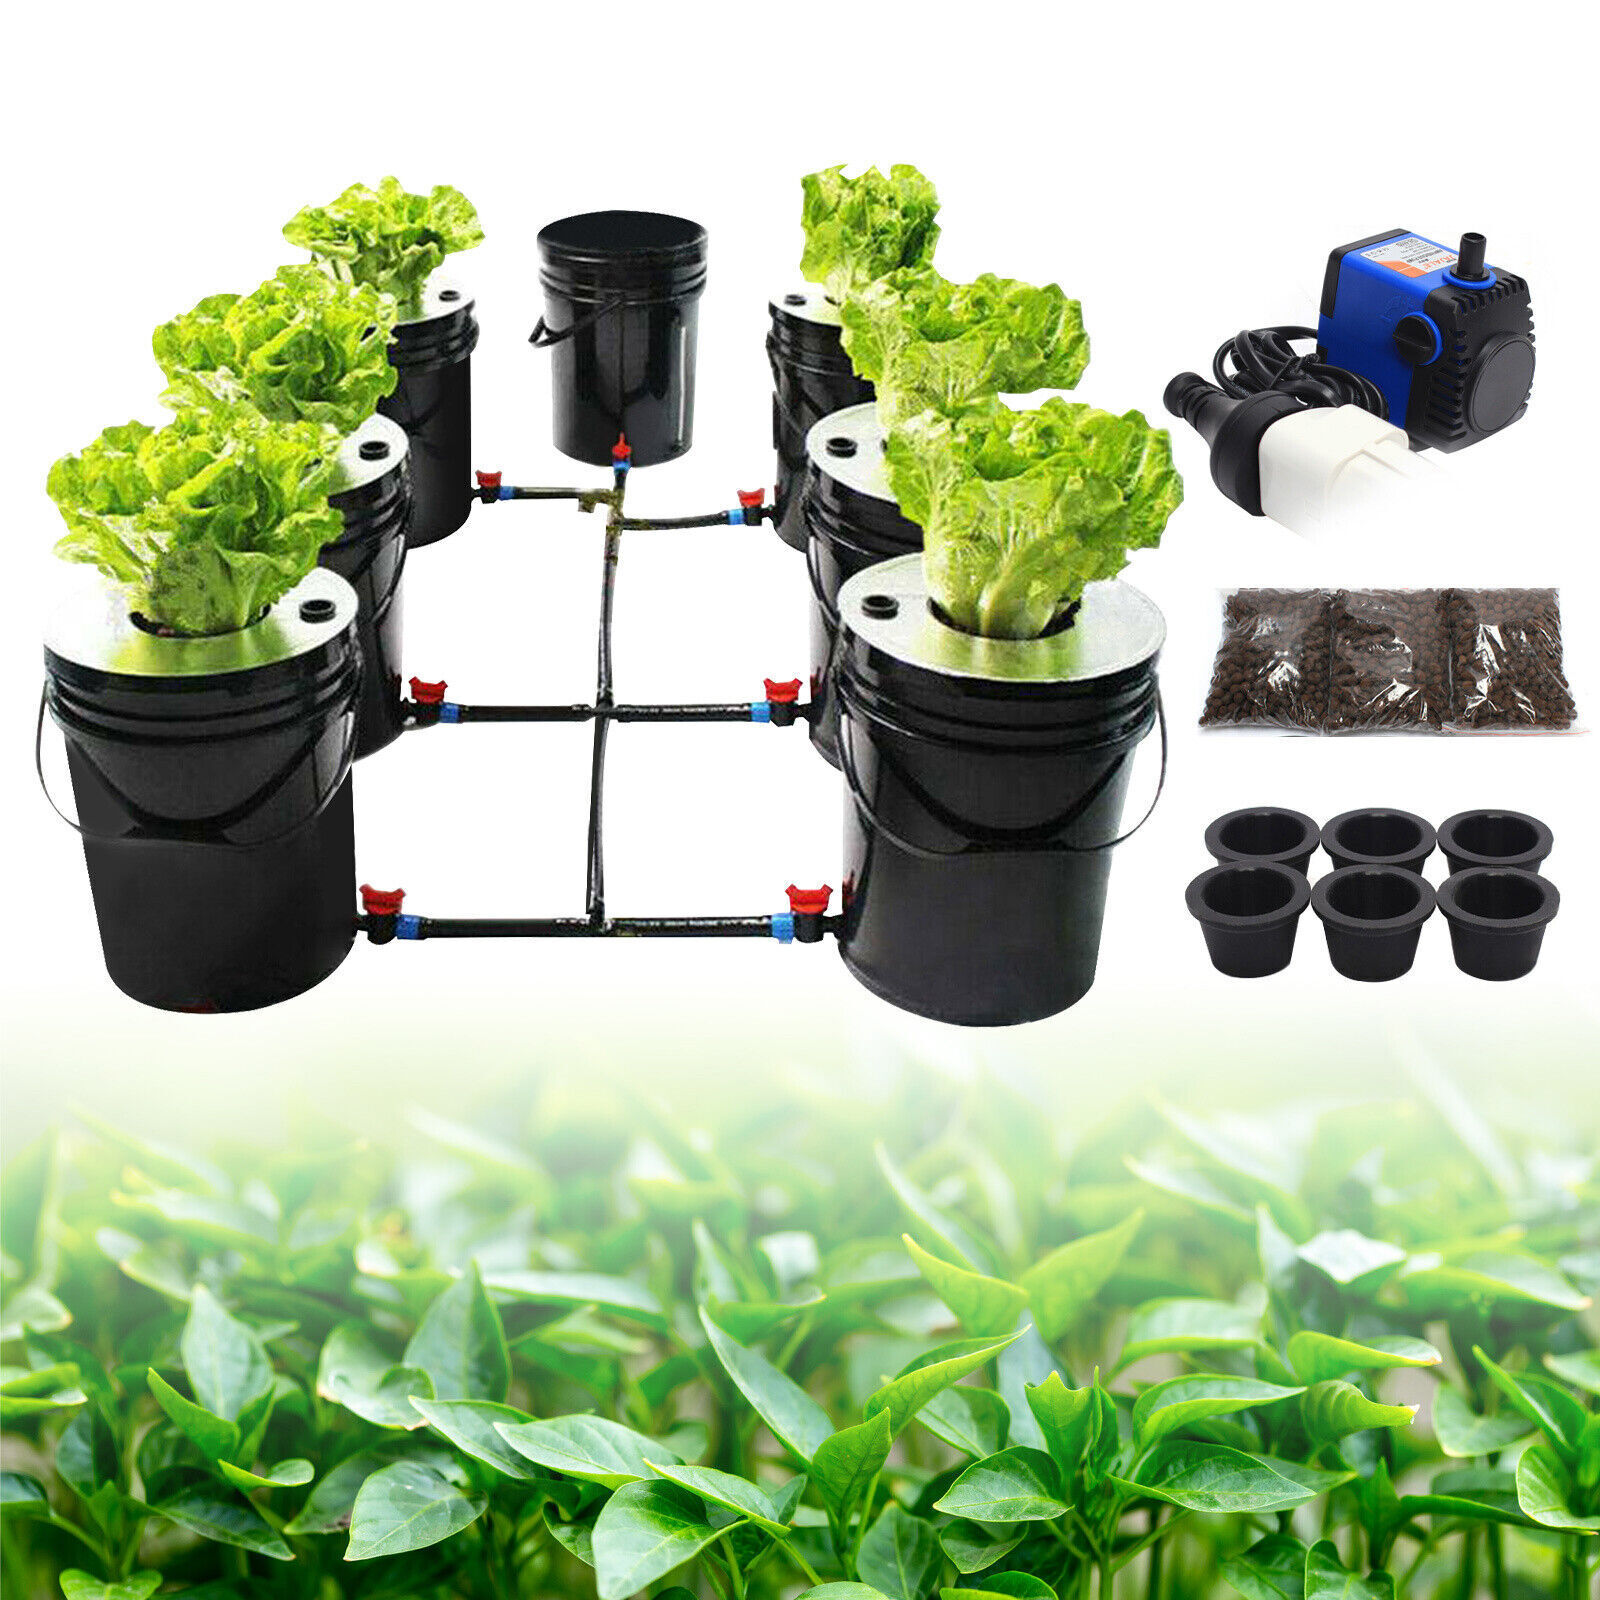 DWC 5 Gallons 6 Buckets Hydroponics Growing System Recirculating Growing Kit US